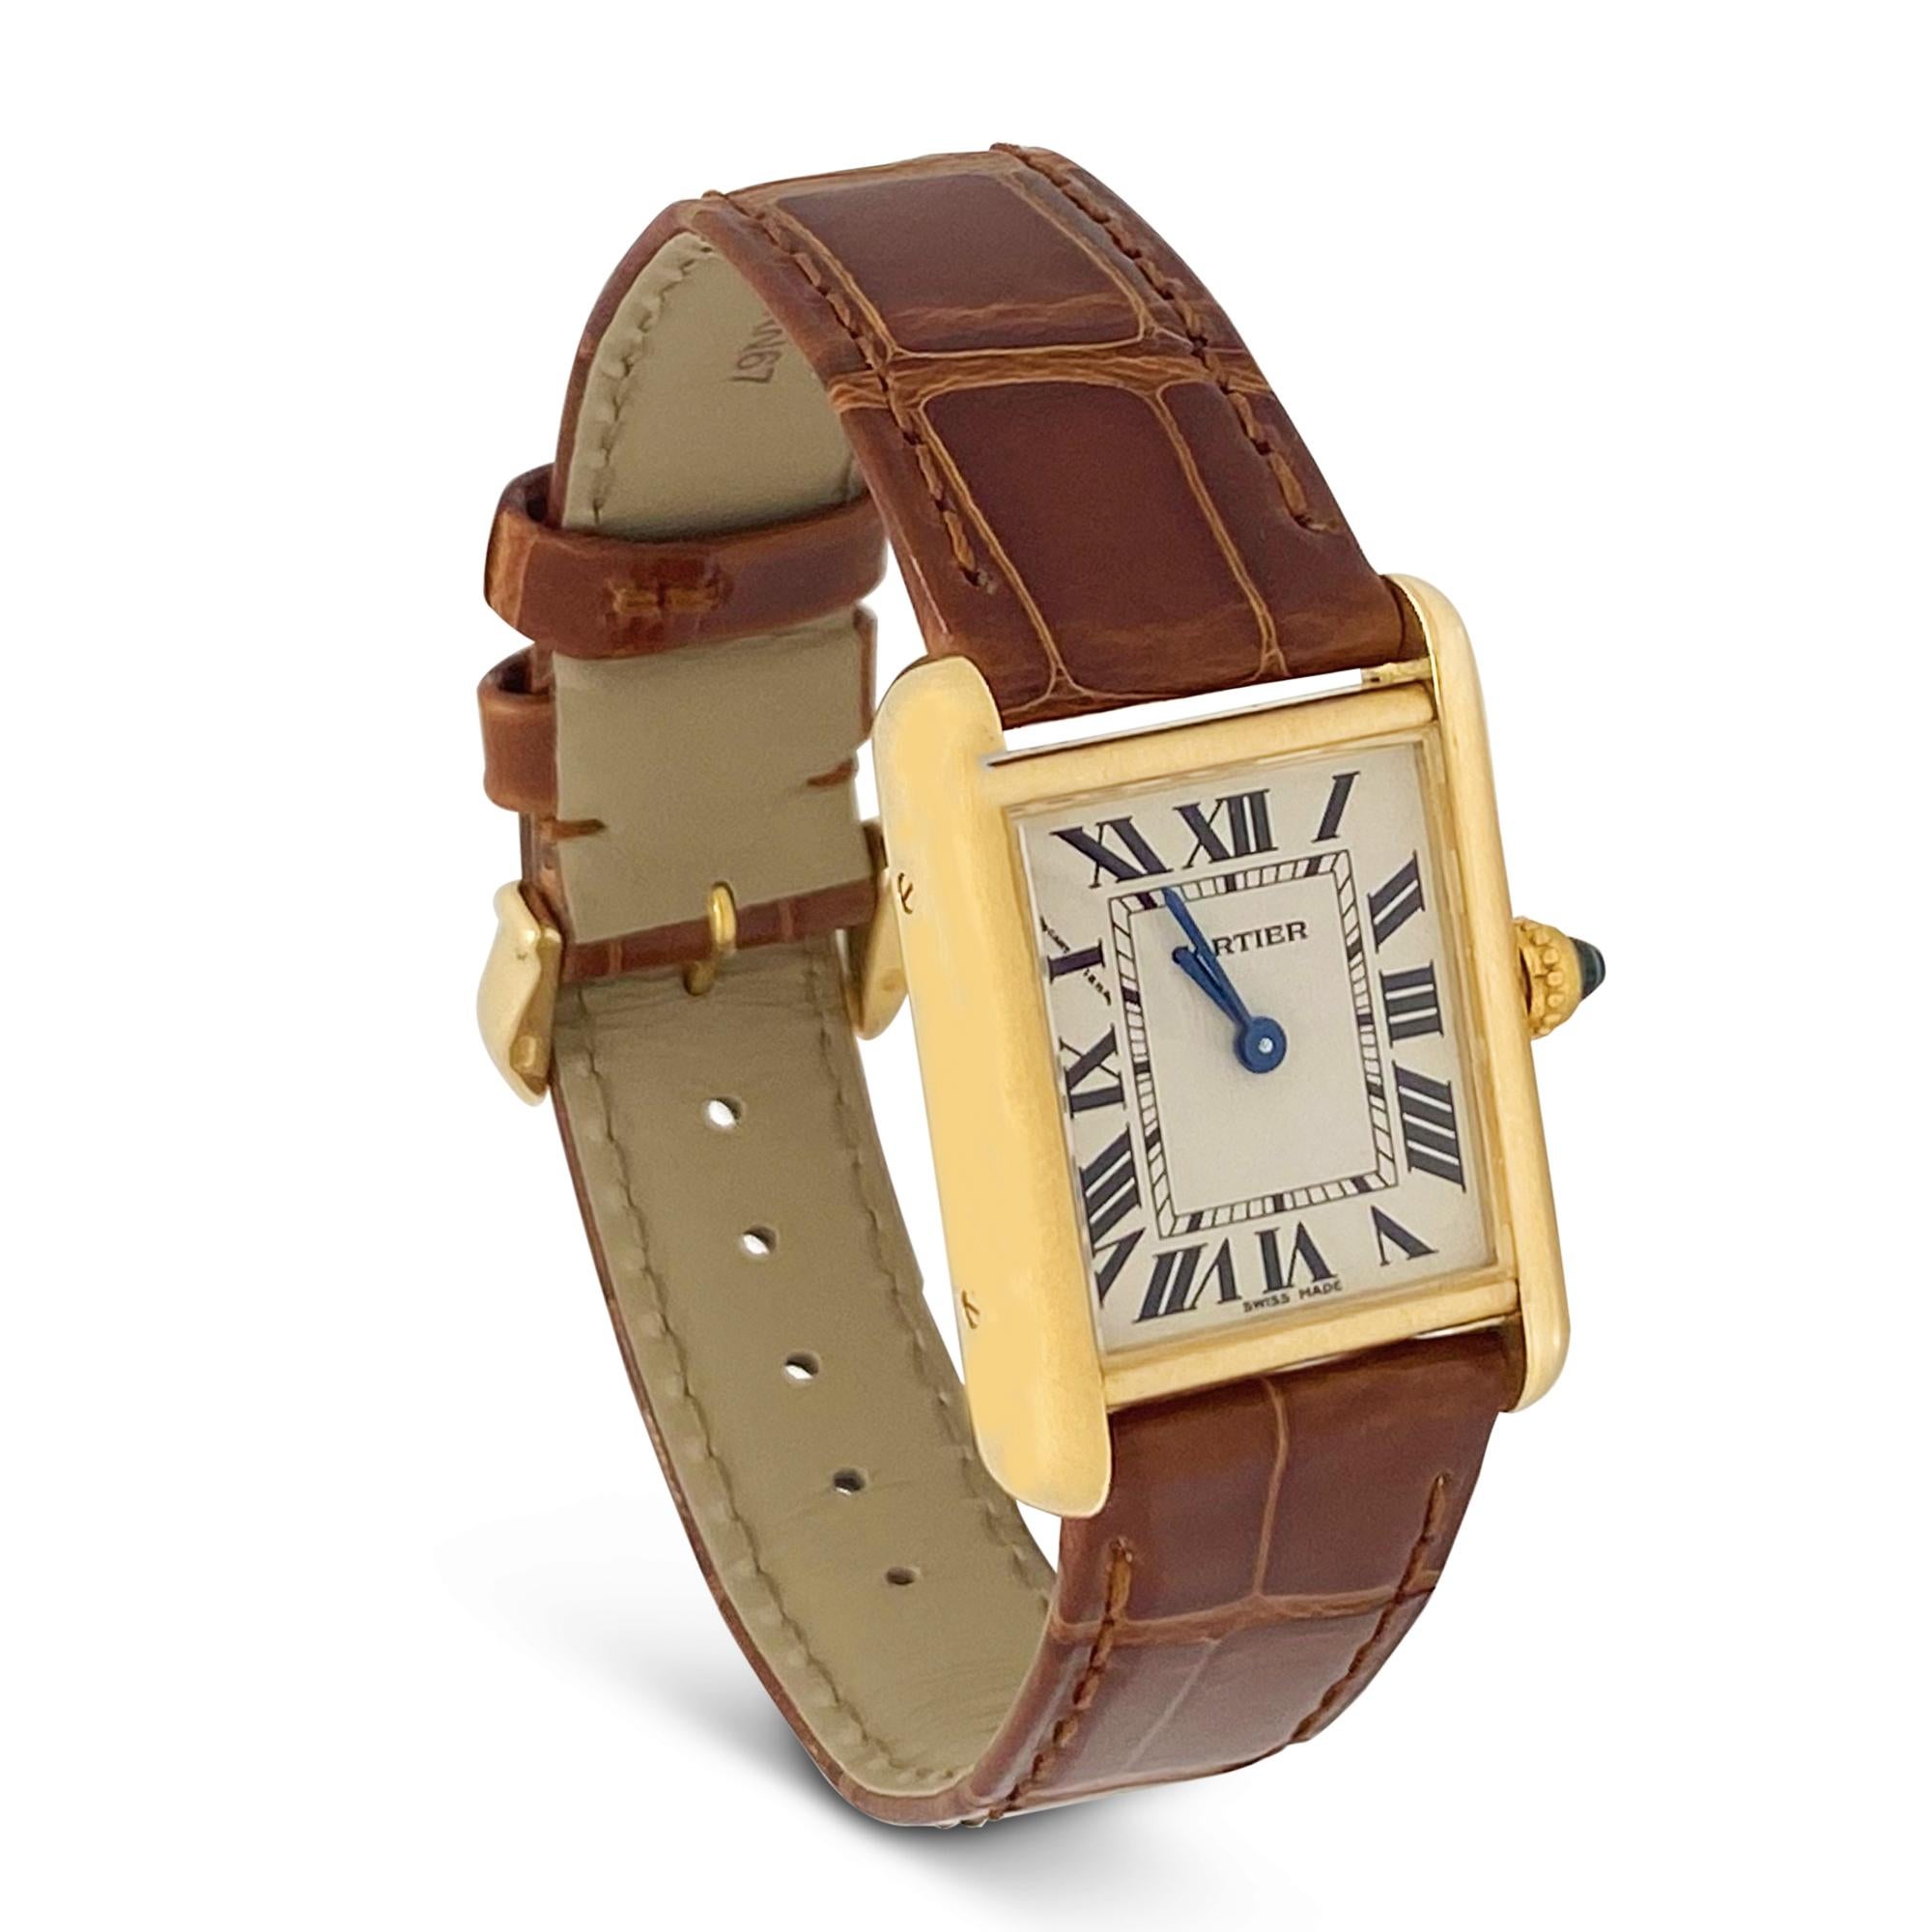 Authentic Cartier Tank Louis watch crafted in 18 karat yellow gold.  22mm x 29mm 18 karat yellow gold case, off-white dial, blued steel sword shaped hands and synthetic spinel crown.  Quartz movement. Brown alligator Cartier strap.  Watch is